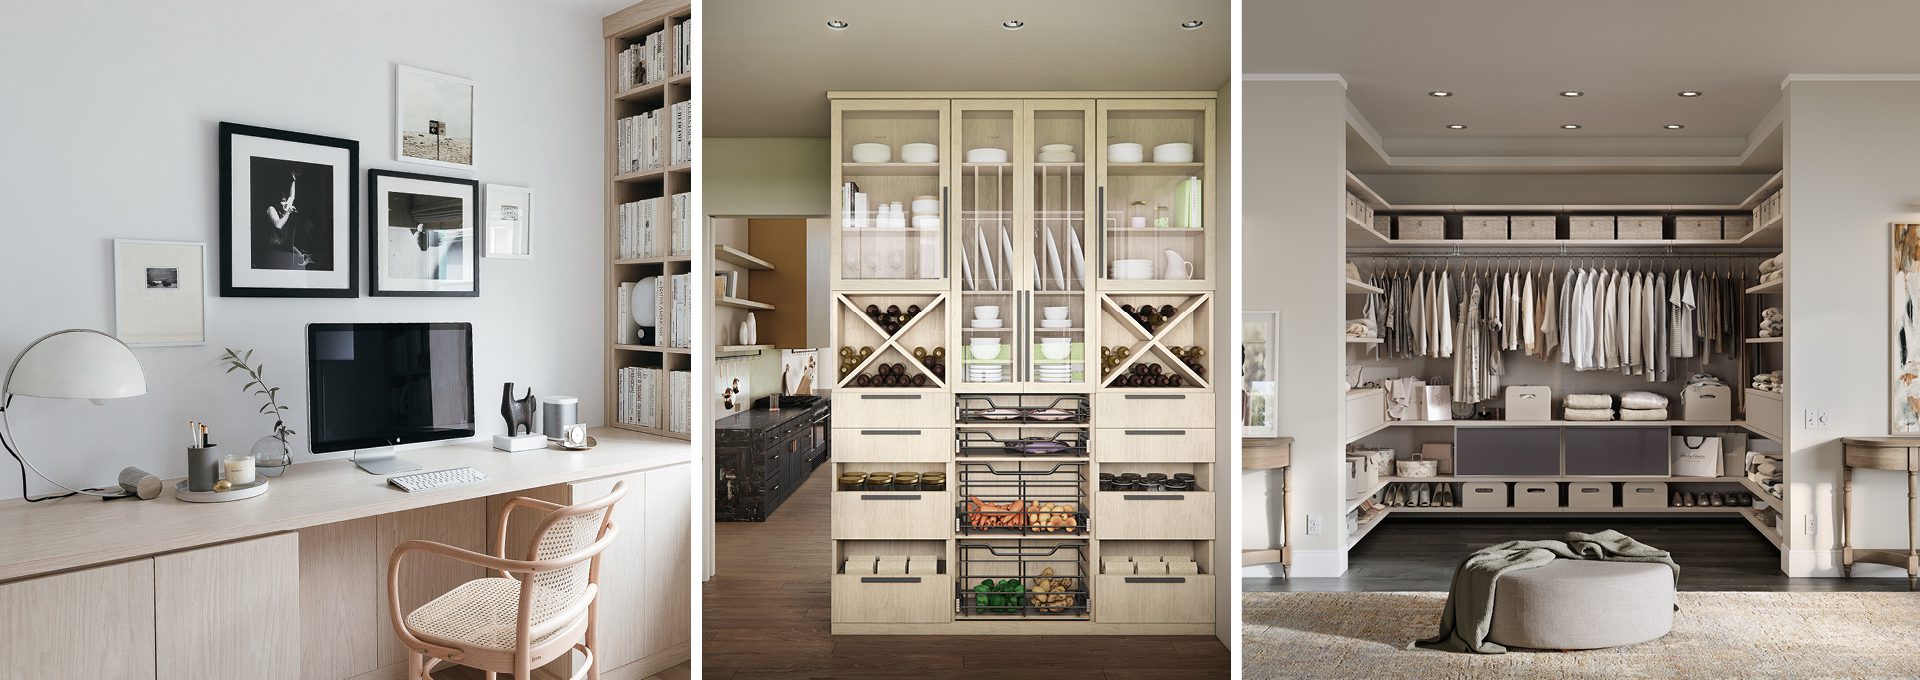 Enjoy the California Closets Savings Promotion Event with up to $2,500 savings for new walk in closet, media center, or kitchen pantry.